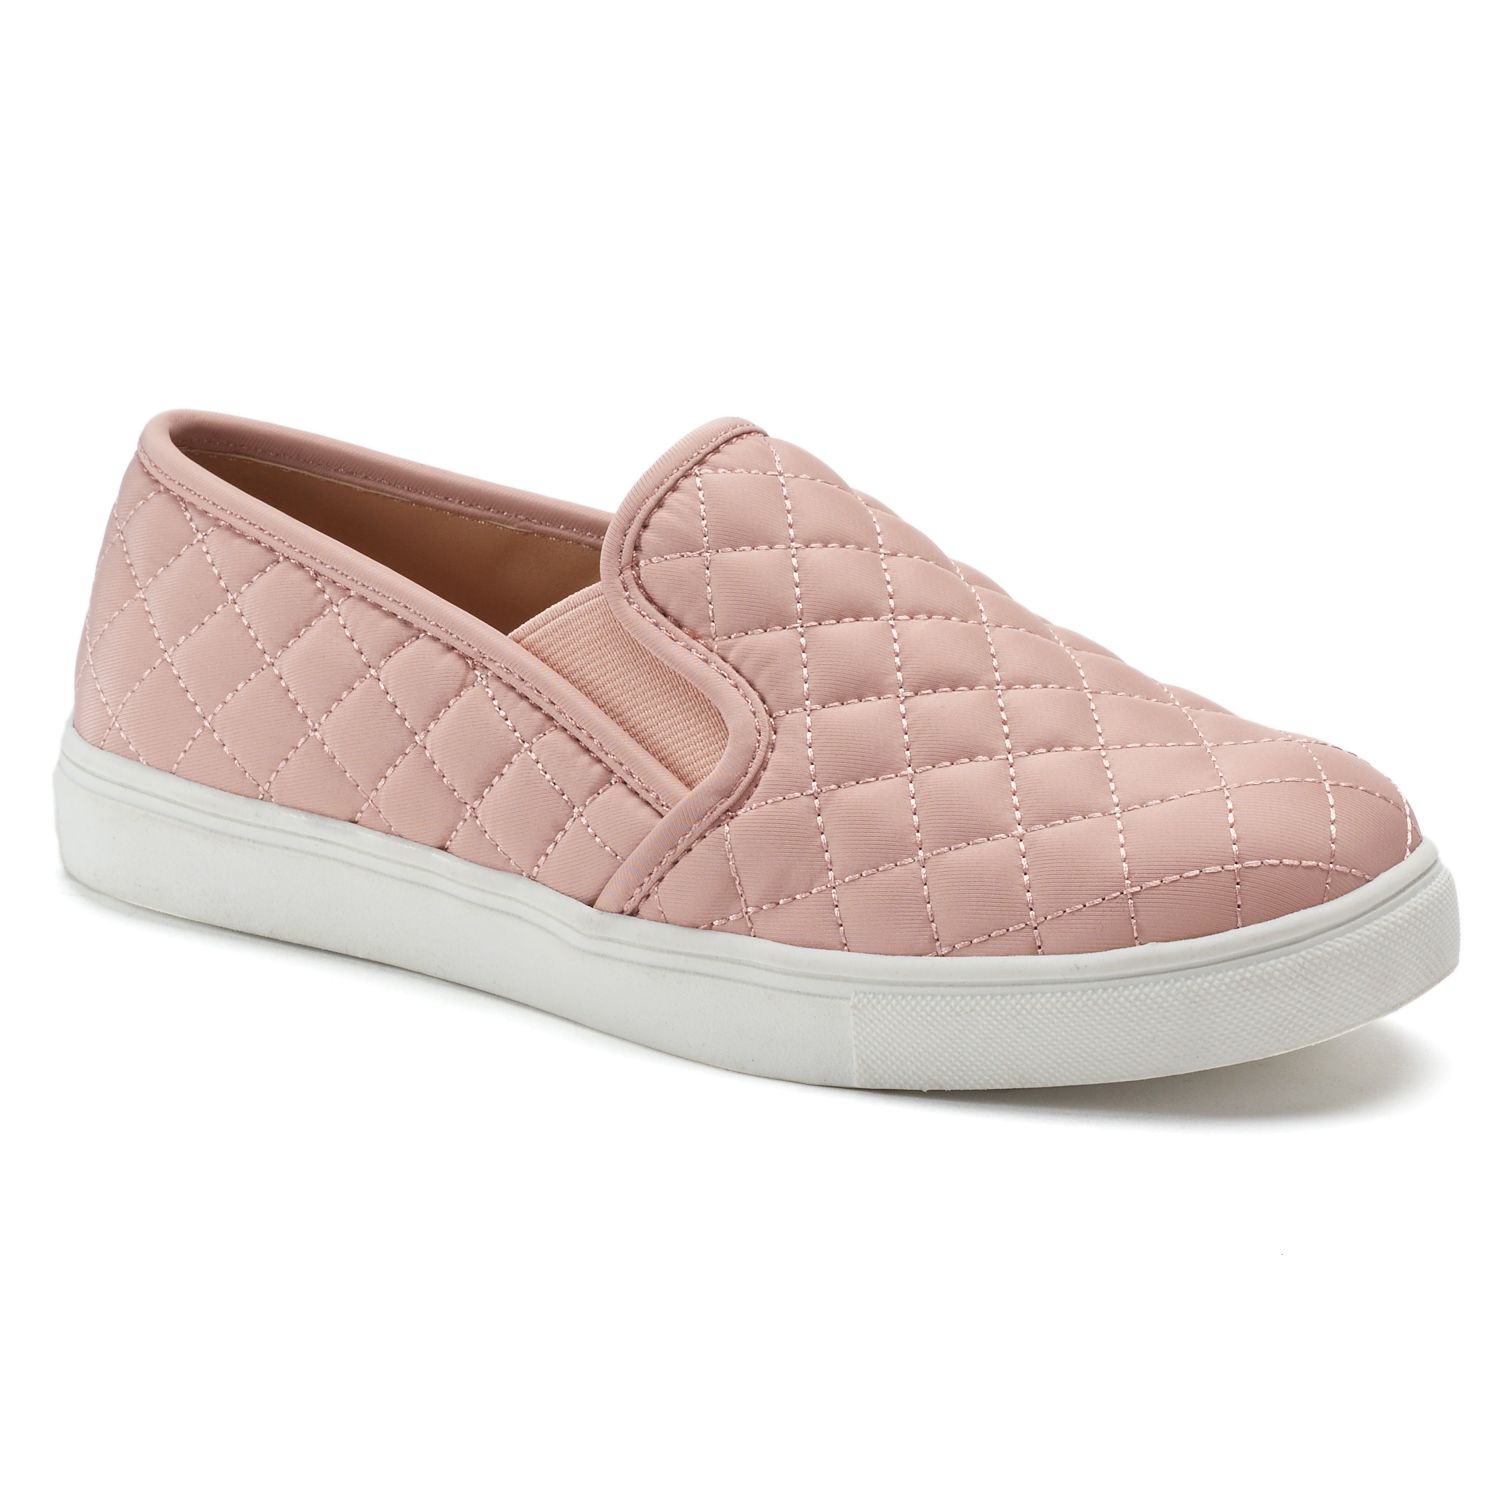 SO® Bay Women's Quilted Slip-On Sneakers